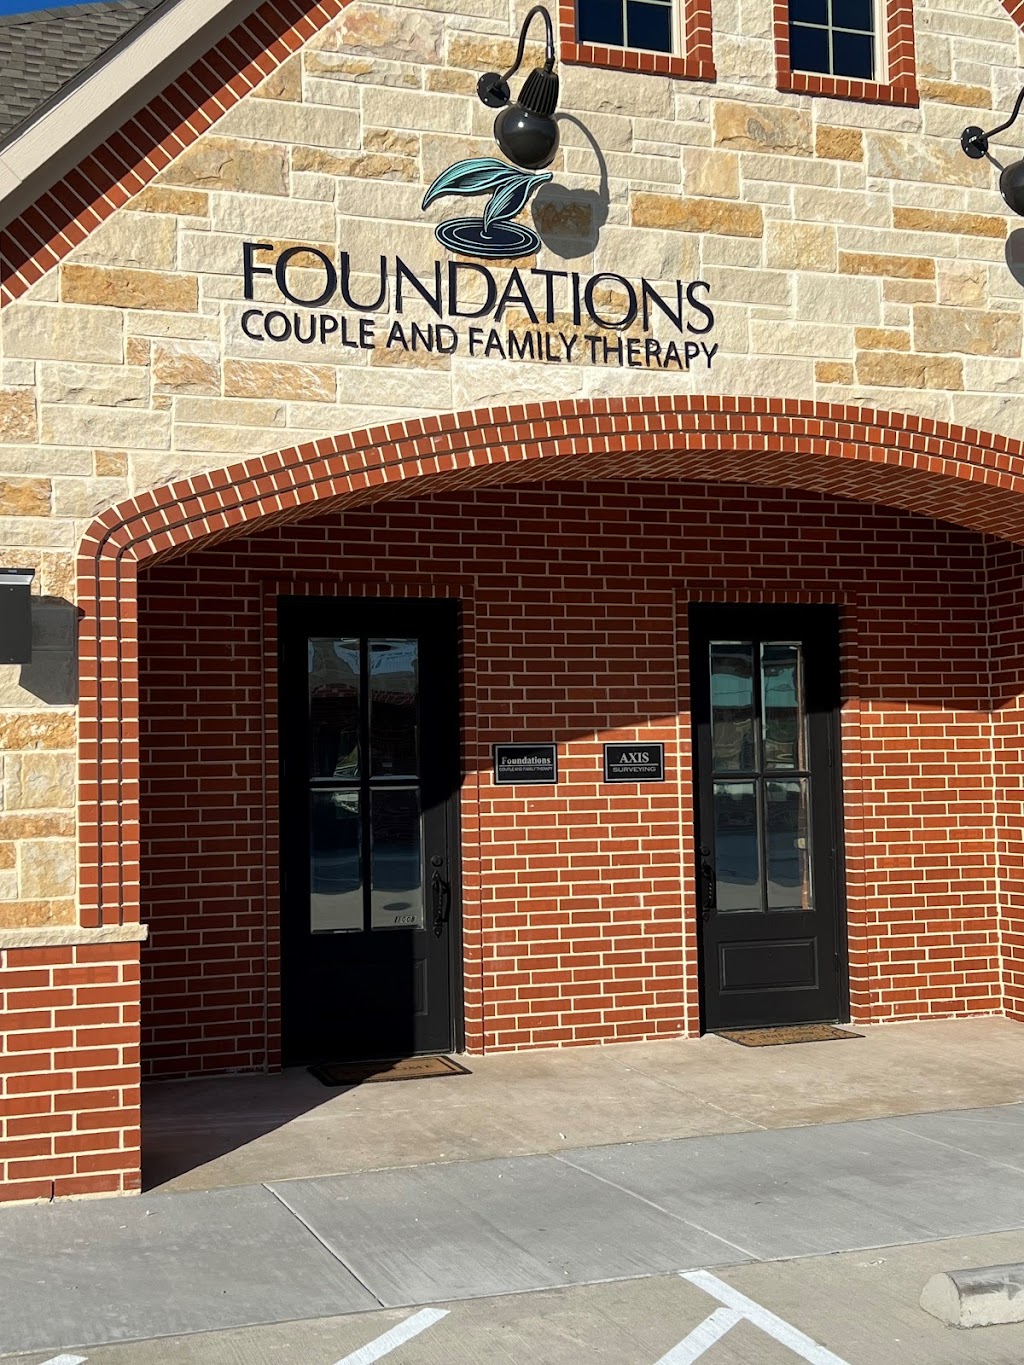 Foundations Couple and Family Therapy | 1002 Legacy Ranch Rd Suite 100B, Waxahachie, TX 75165 | Phone: (972) 441-5811